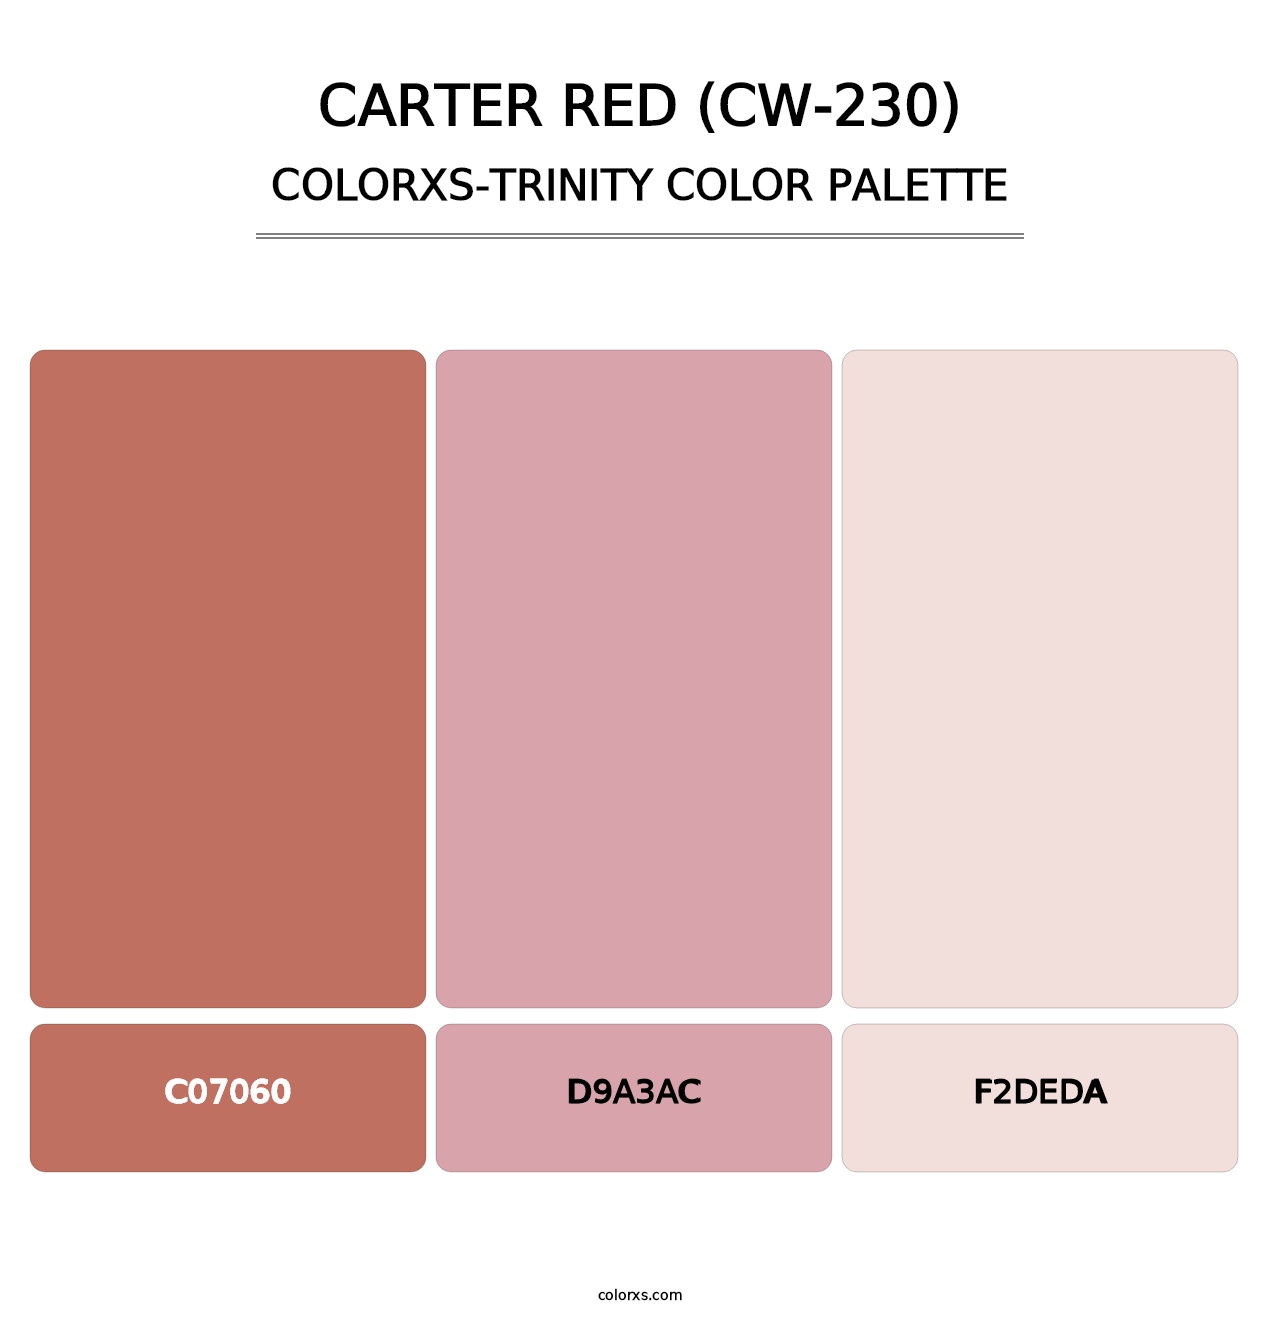 Carter Red (CW-230) - Colorxs Trinity Palette